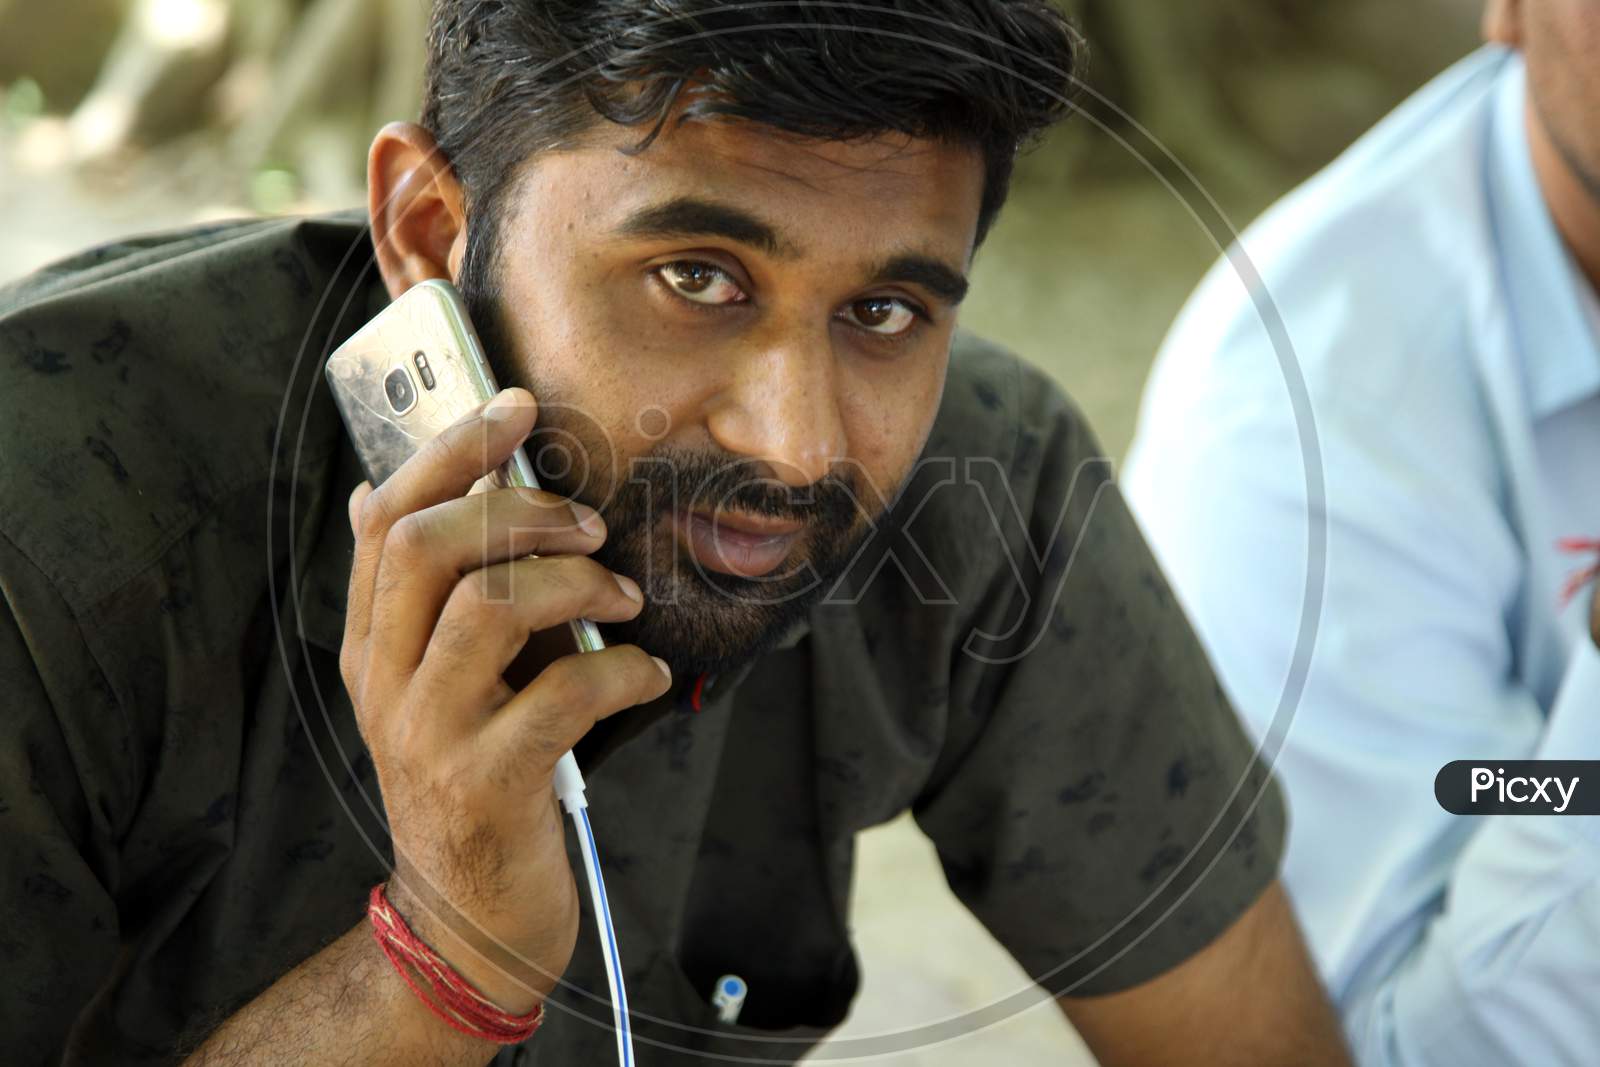 Portrait of a Young Indian Man using a Mobile